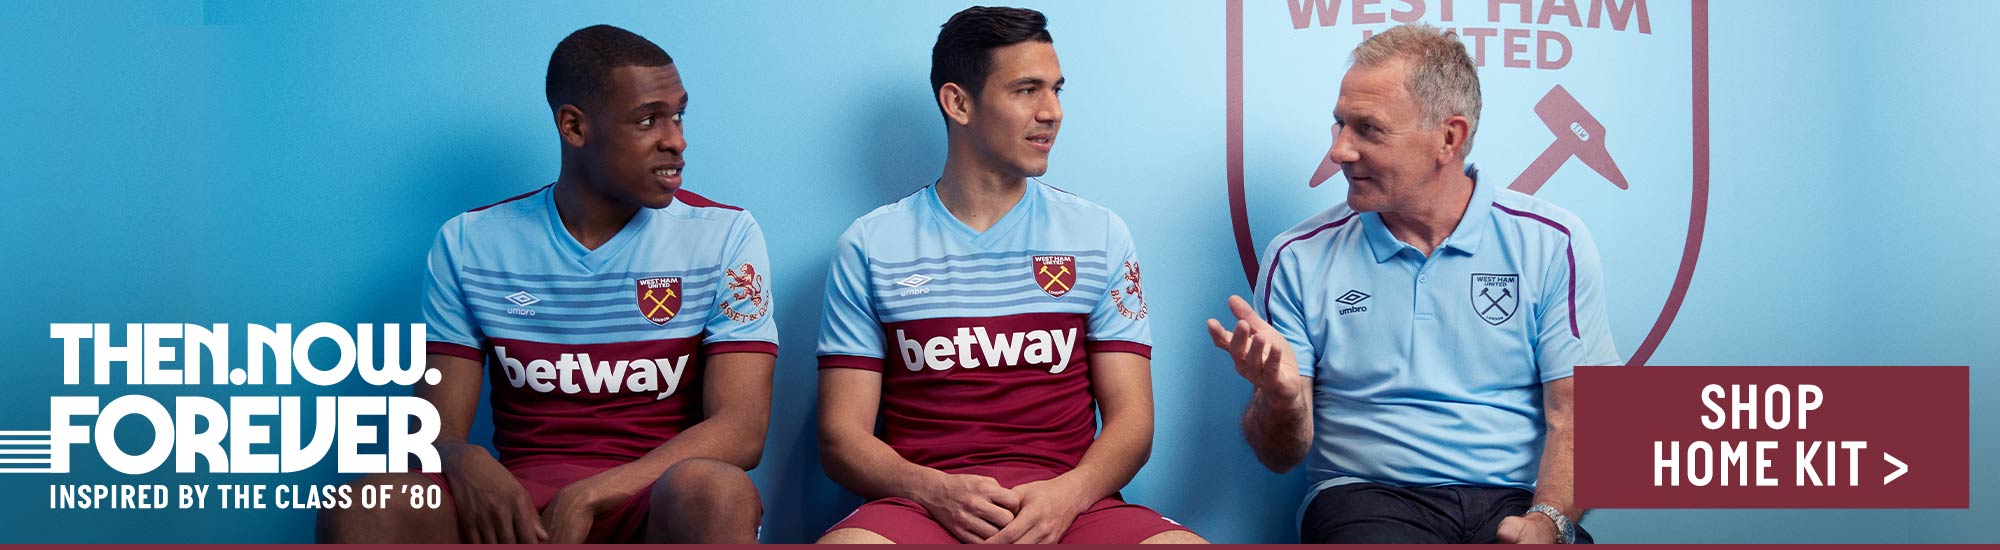 Buy home kit at the official West Ham store